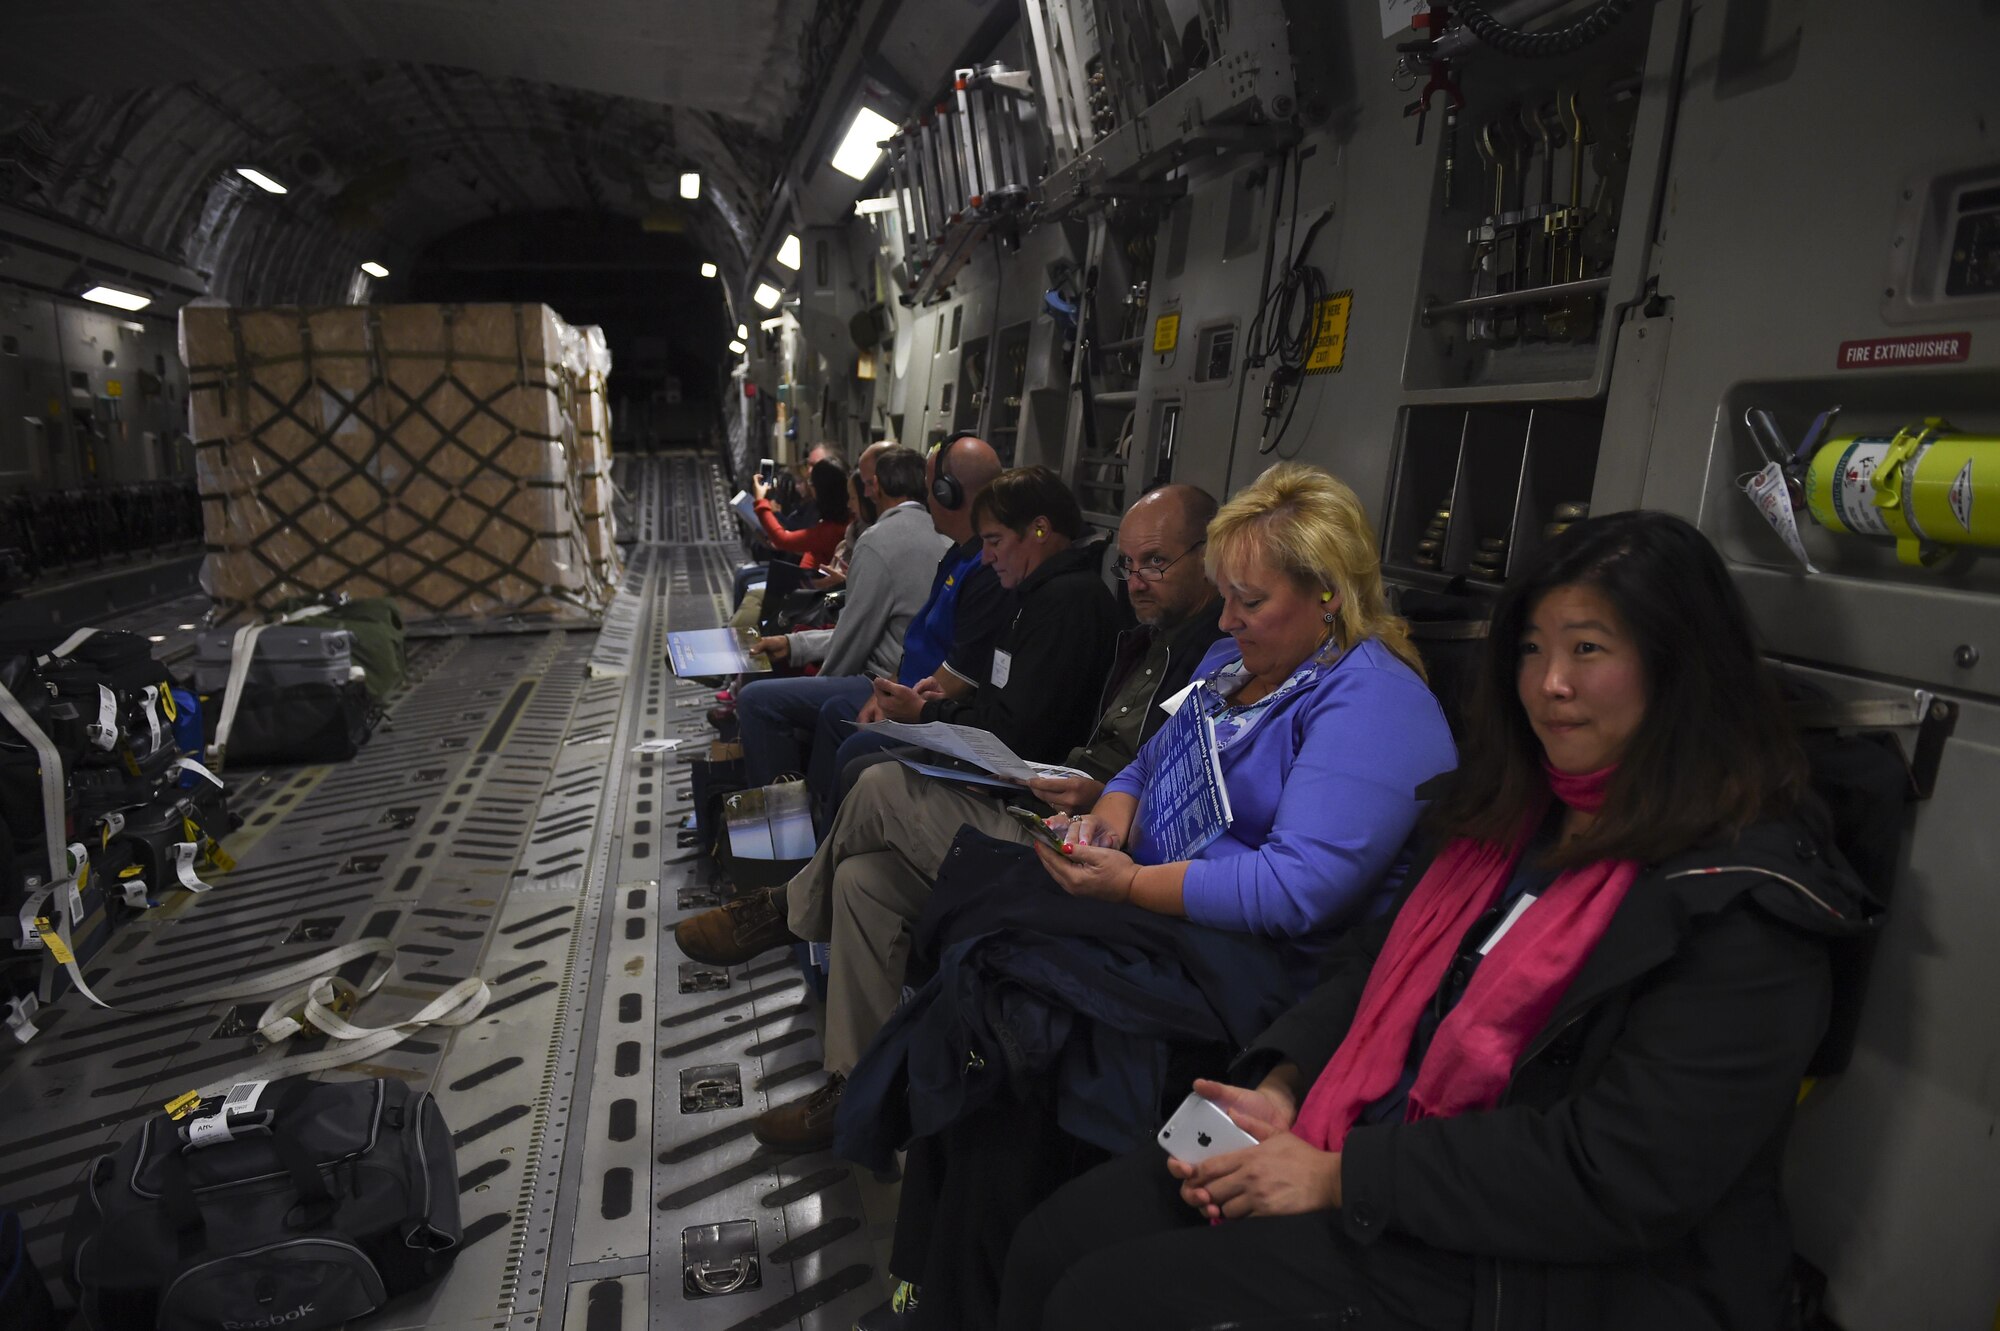 McChord civic leaders sit on board a C-17 Globemaster III before departing to Joint Base Elmendorf-Richardson, Alaska, Aug. 30, 2016. The group received a two-day tour of the base and various units to familiarize itself with the missions and Airmen and Soldiers there. (U.S. Air Force photo/ Staff Sgt. Naomi Shipley)